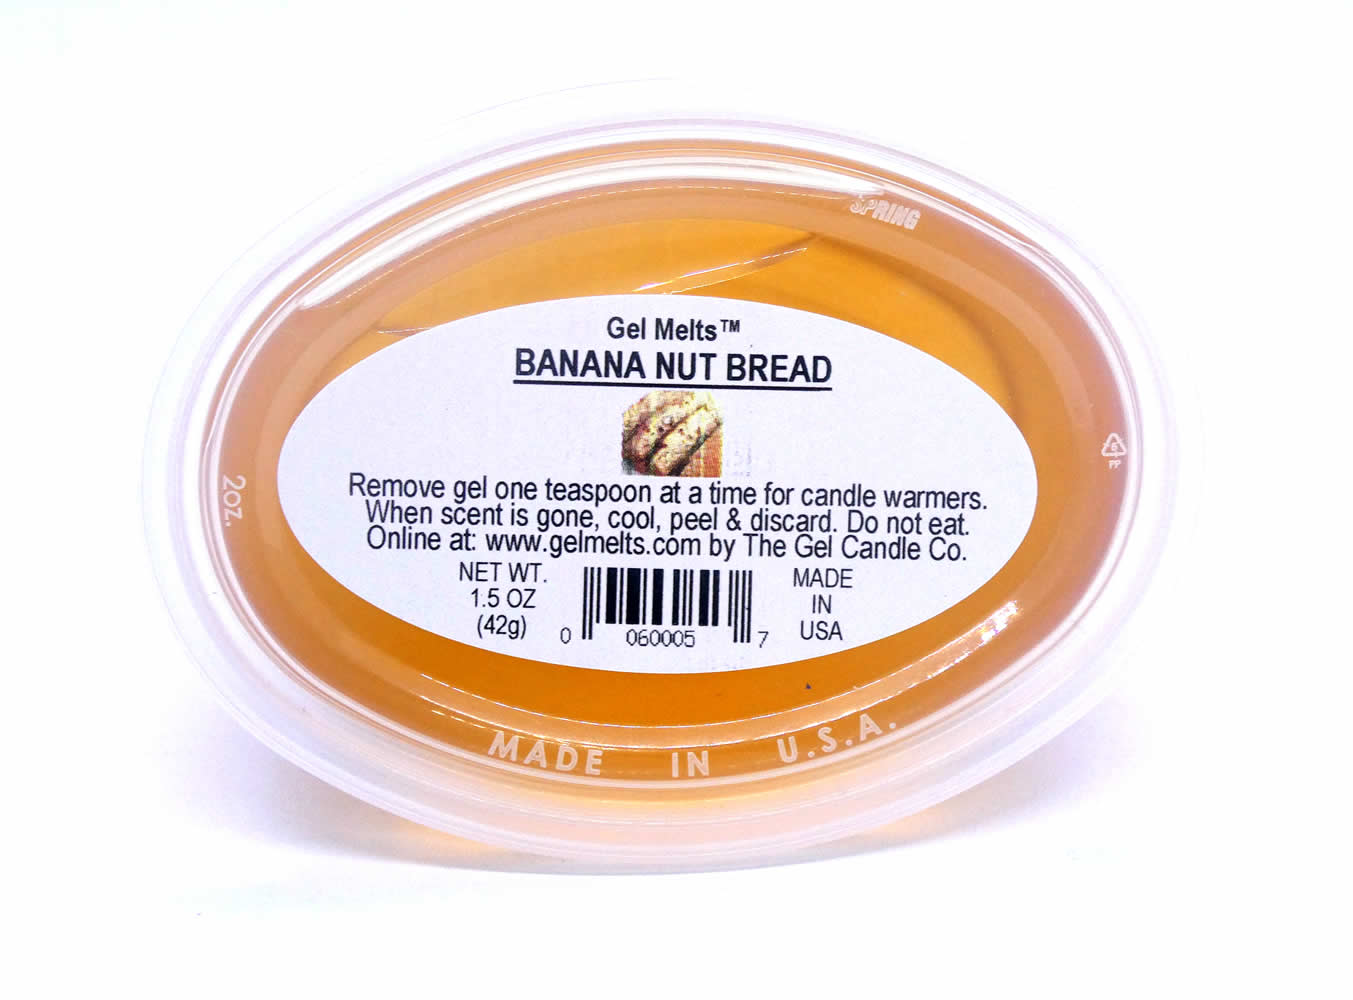 Banana Nut Bread scented Gel Melts™ Gel Wax for warmers - 3 pack - Click Image to Close